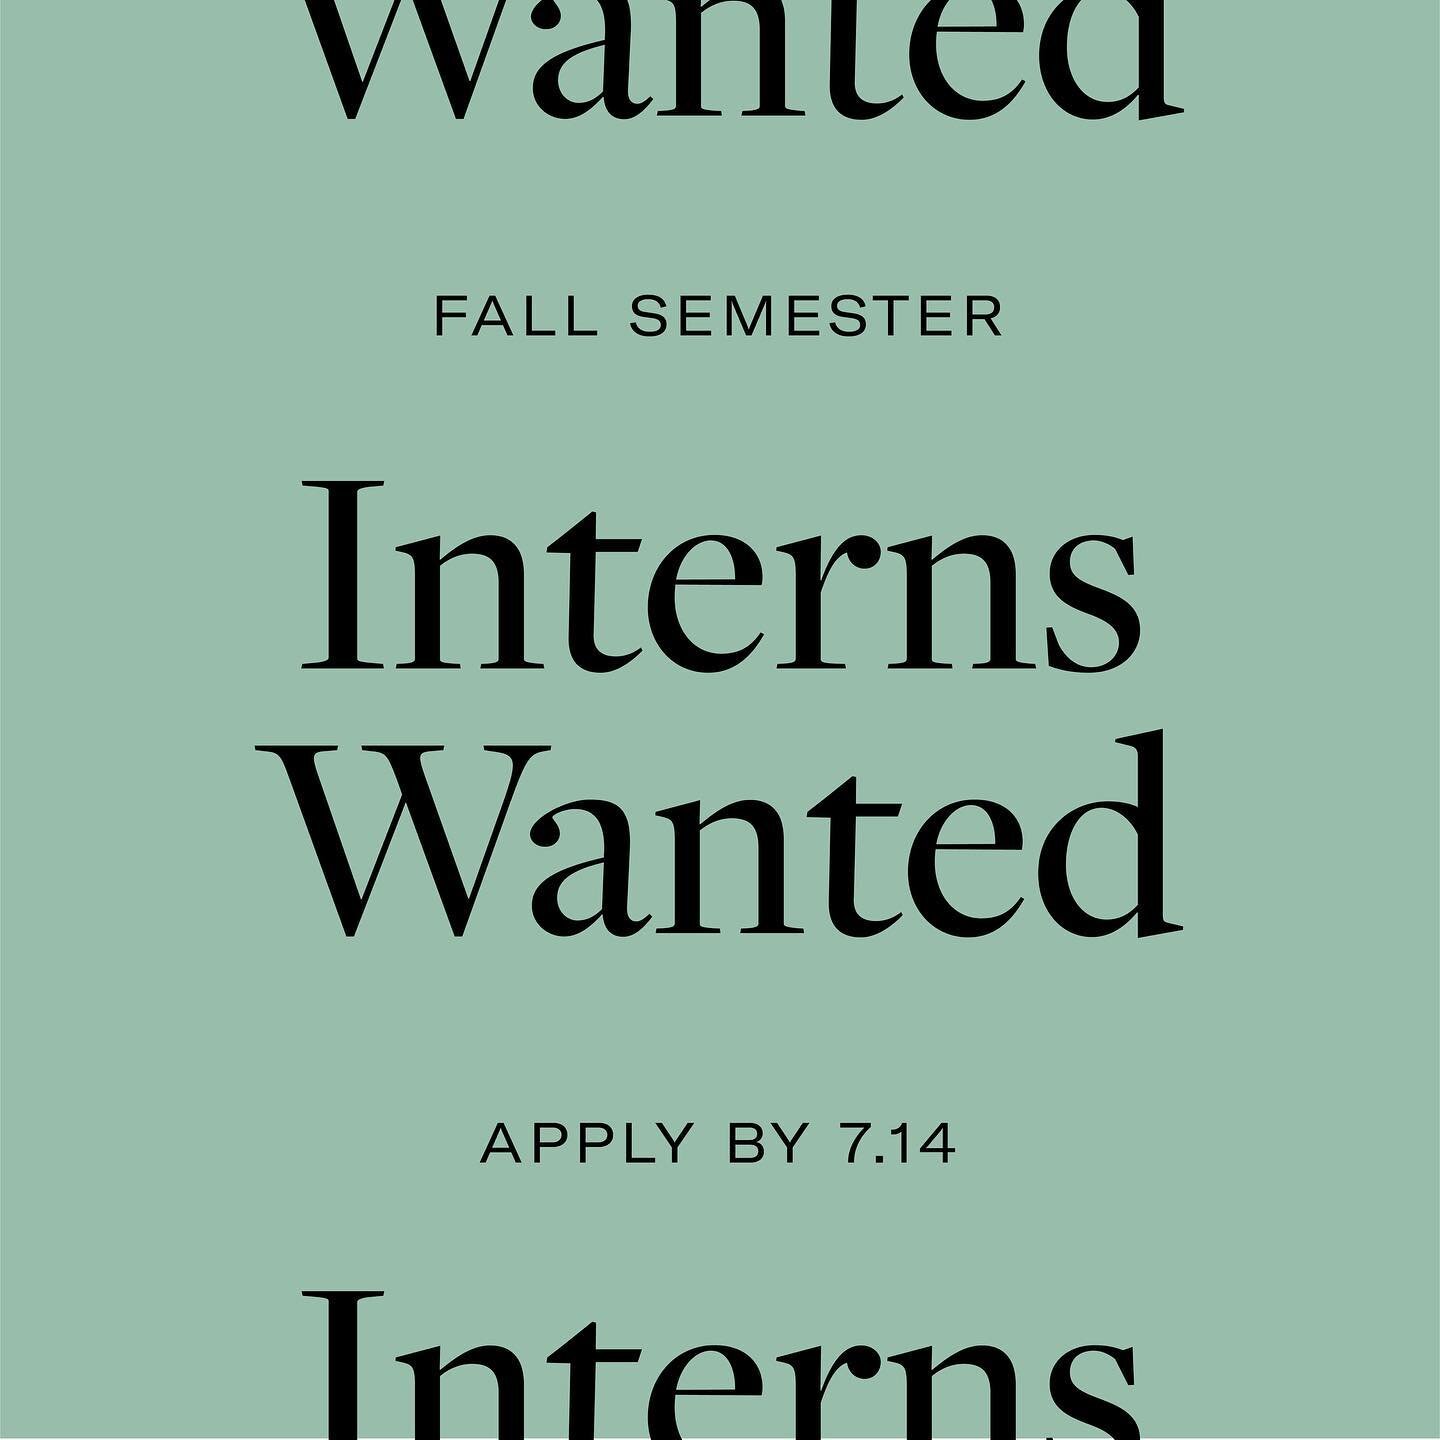 To the future brand leaders. The quick thinkers. To the next generation of marketing trailblazers prepared to give all they can with all they have&mdash;we can&rsquo;t wait to meet you.&nbsp;&nbsp;
&nbsp;
Internship applications live through 7/14. Su